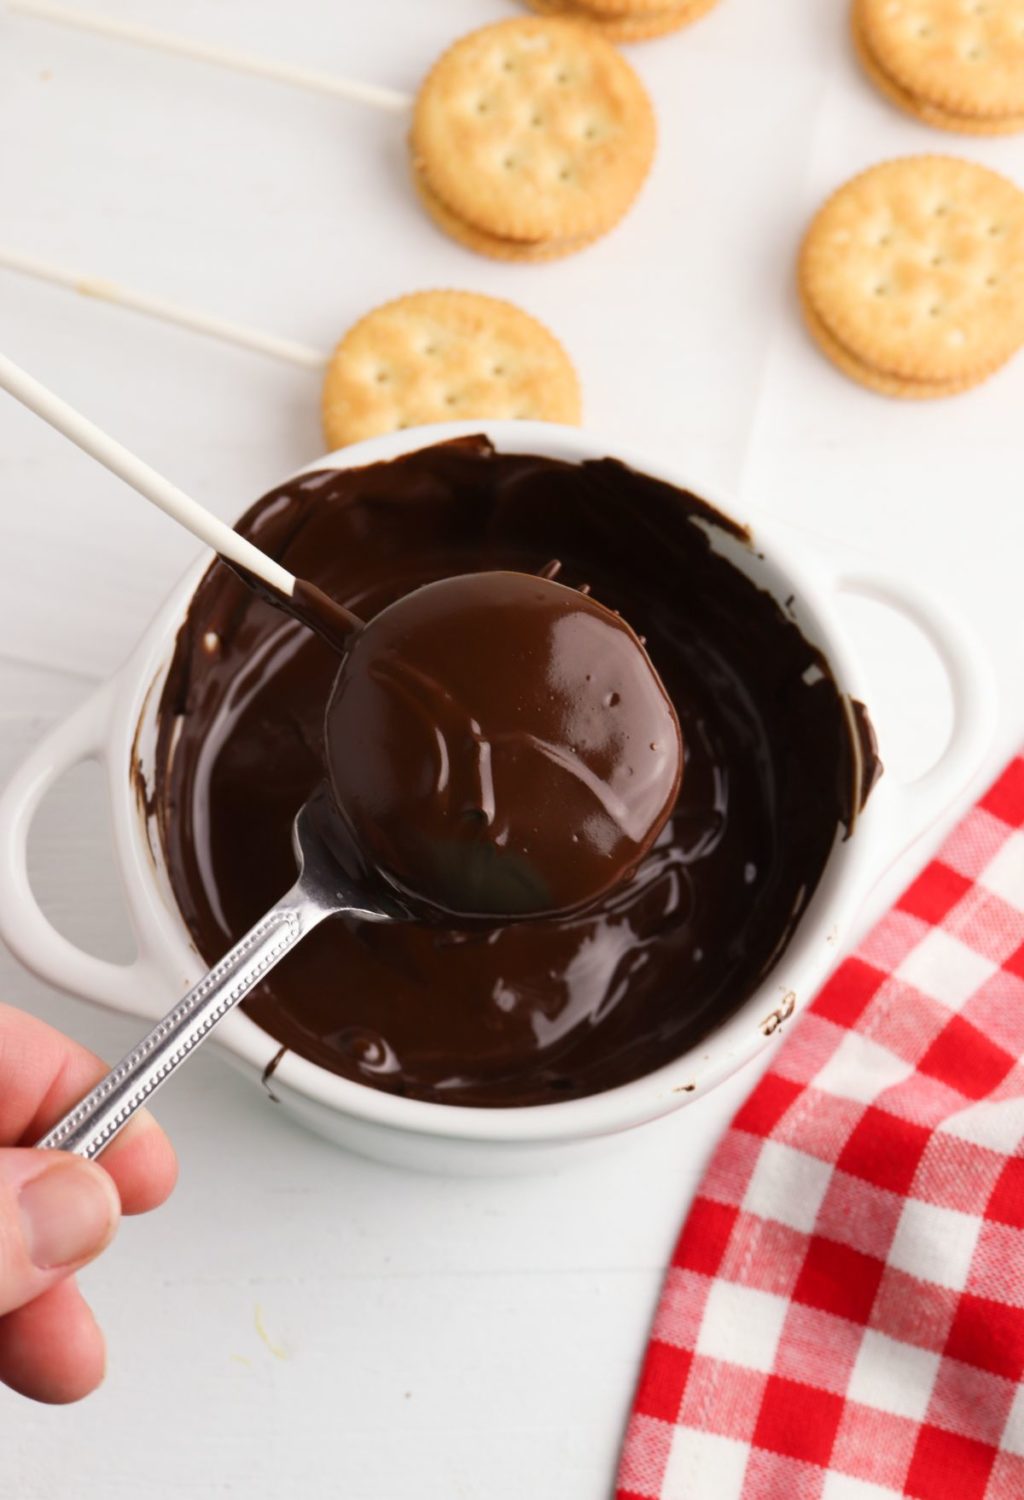 A person is holding a spoon and dipping a cracker in chocolate.